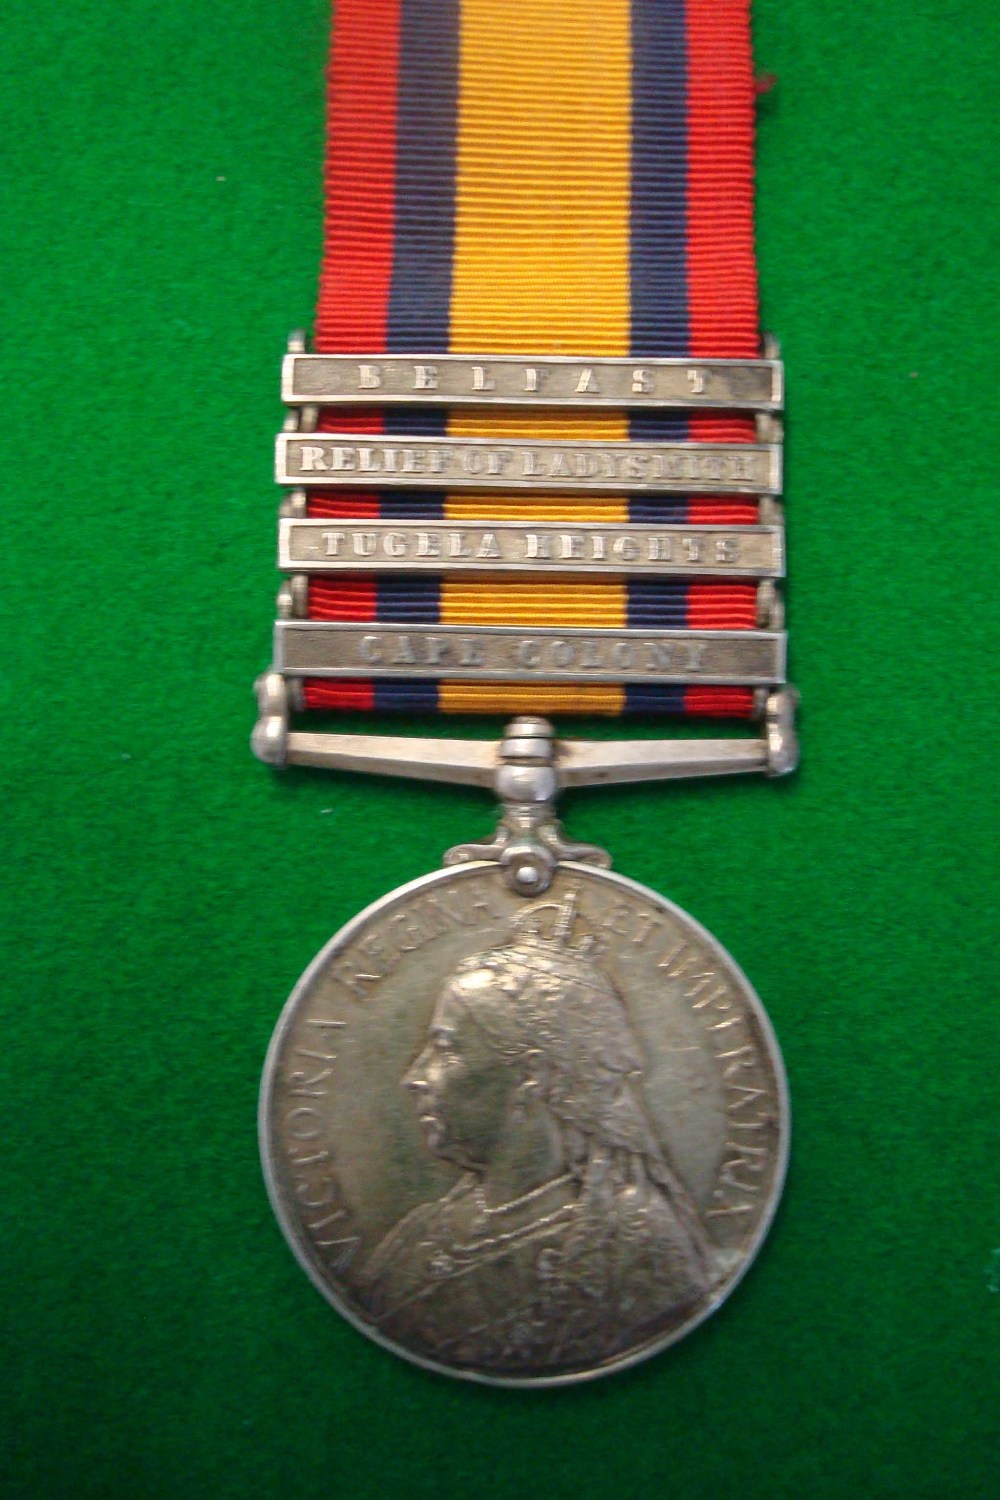 Queens South Africa Medal: To 2378 Pte J Dunn 1st Royal Inniskilling Fusiliers having the Bars